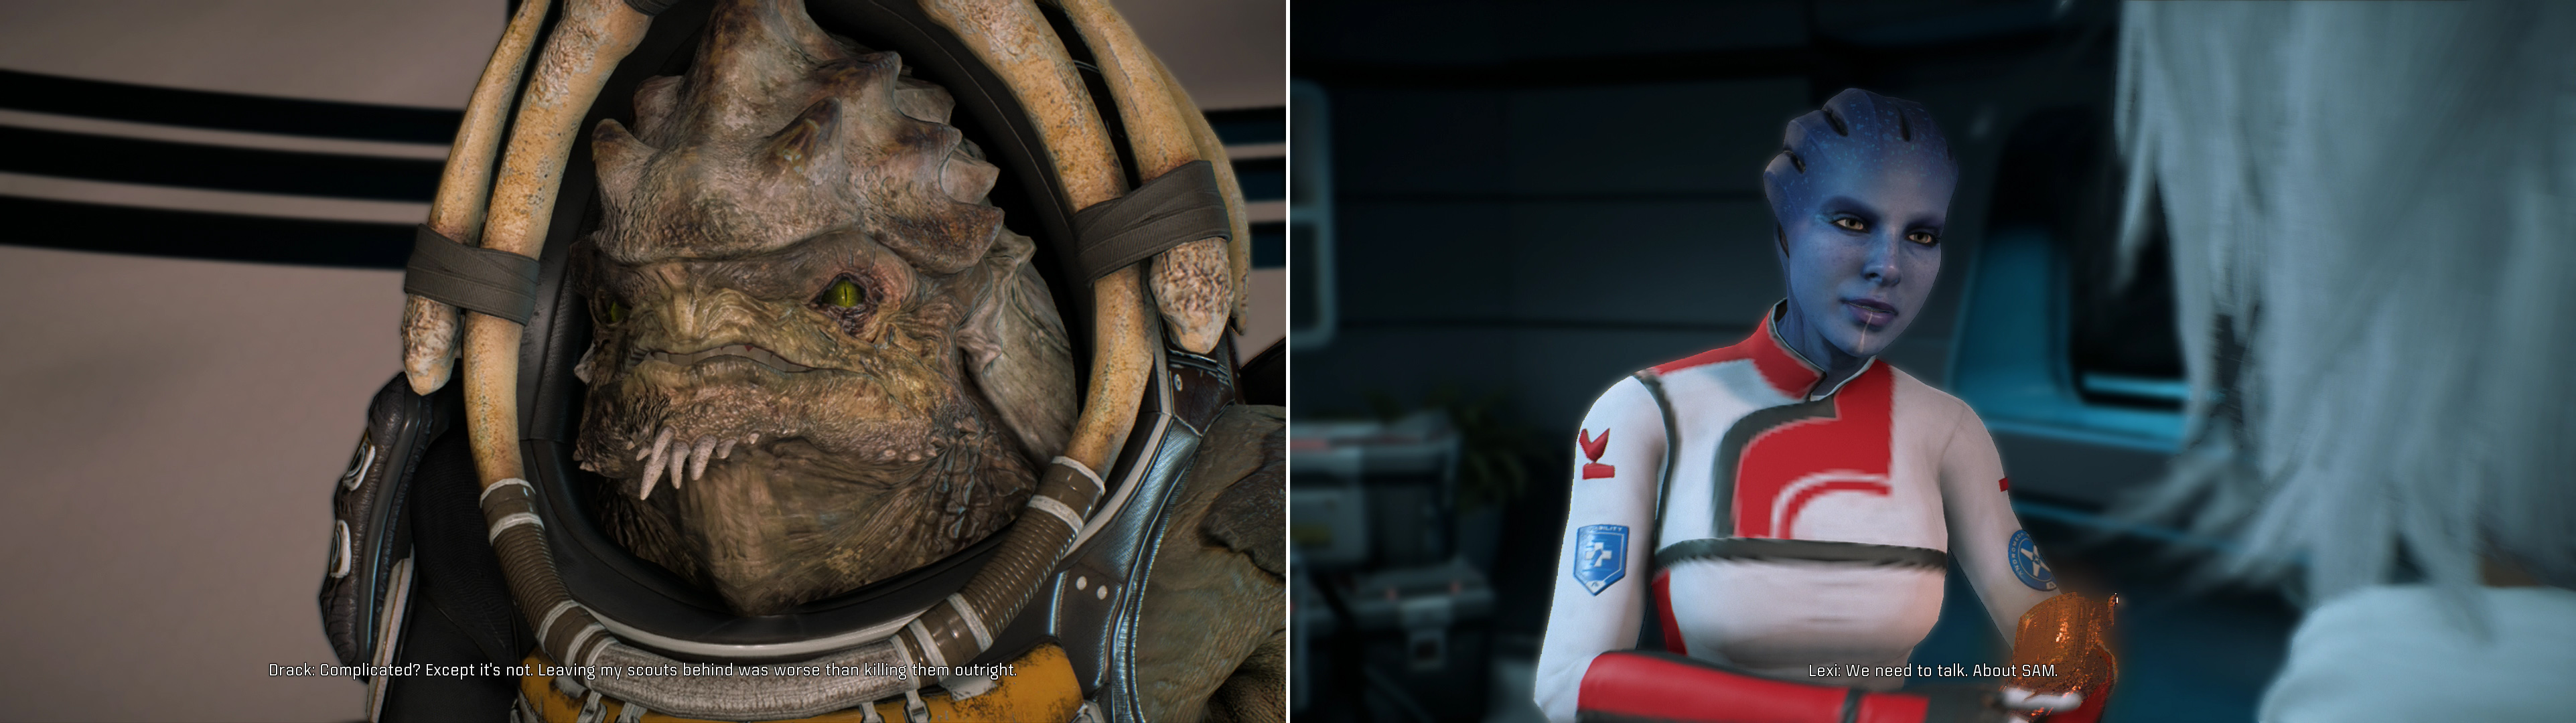 Drack’s reception will be either warm or frosty, depending on your choice during the rescue mission (left). Lexi’s concerns about the mission are somewhat more professional (right).